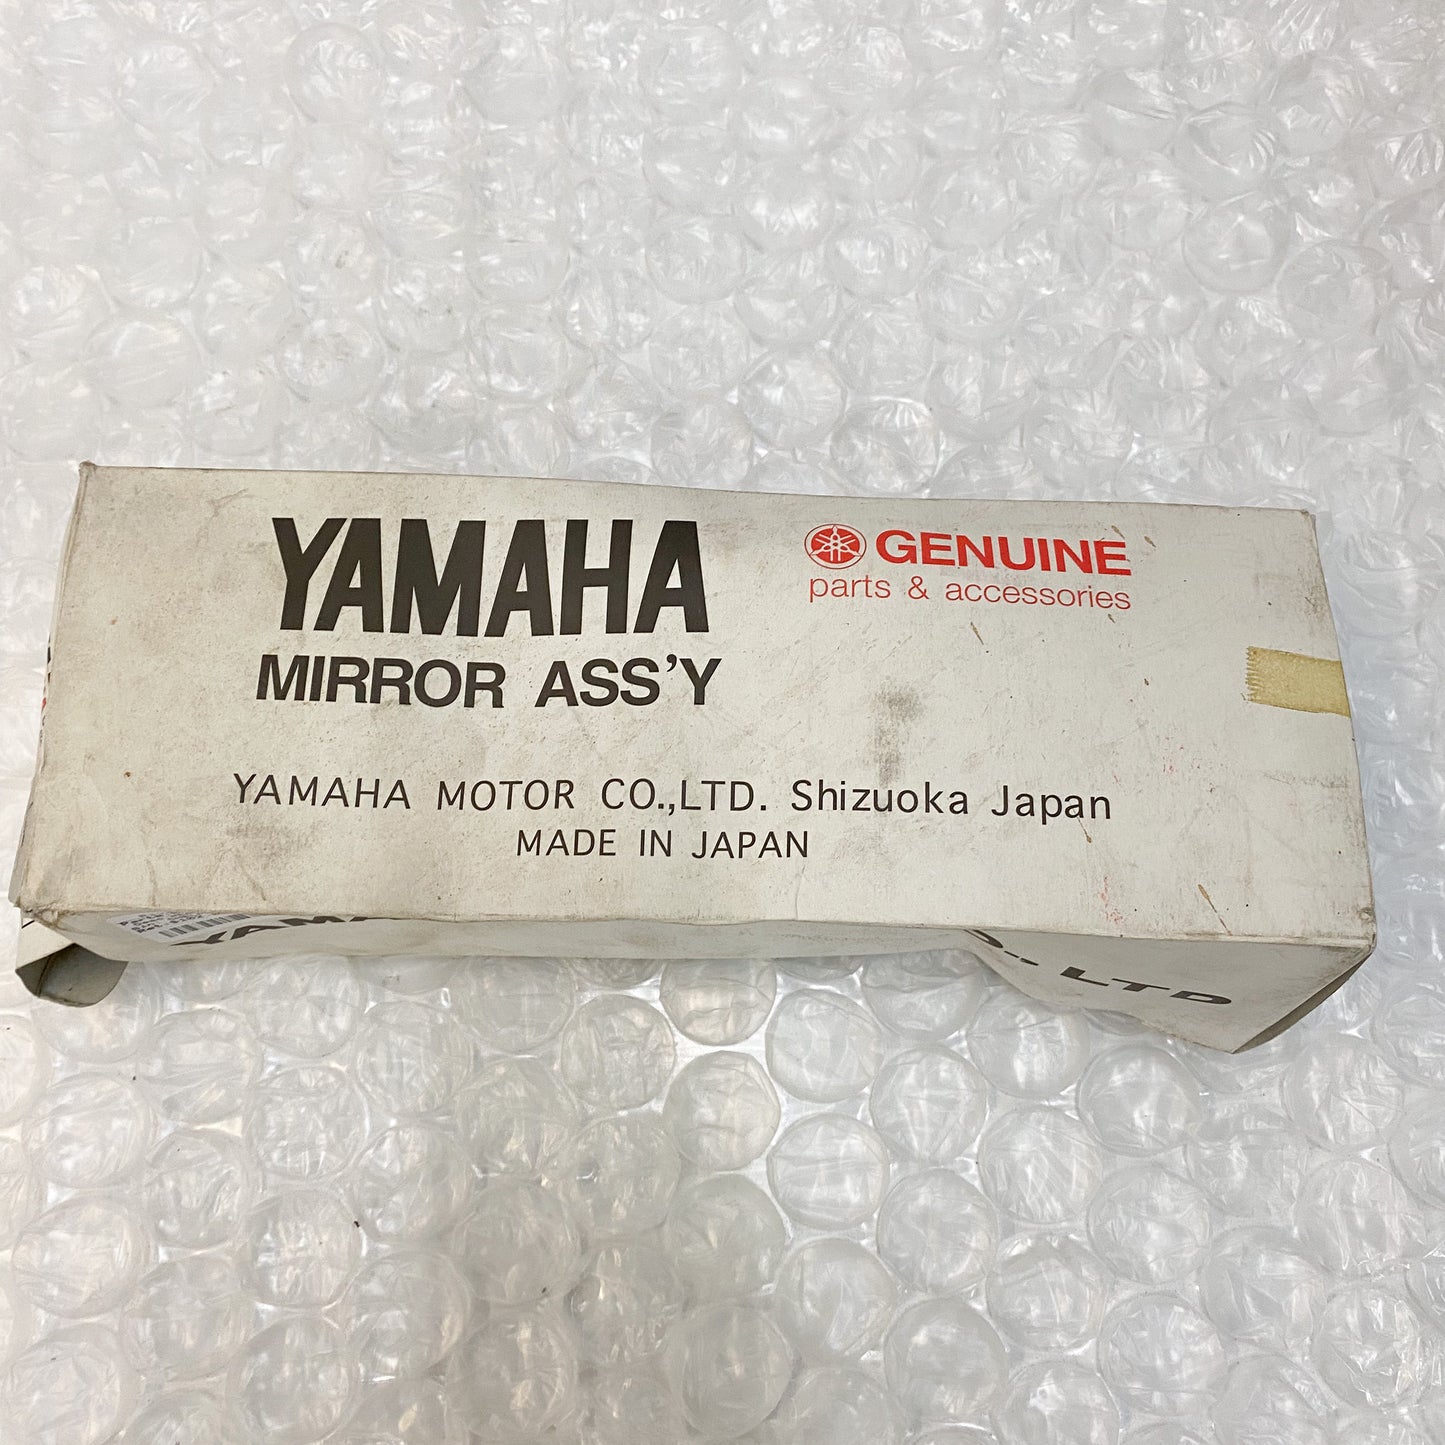 Yamaha Rear View Mirror Assembly, Left  5SL-26280-00-00 NOS